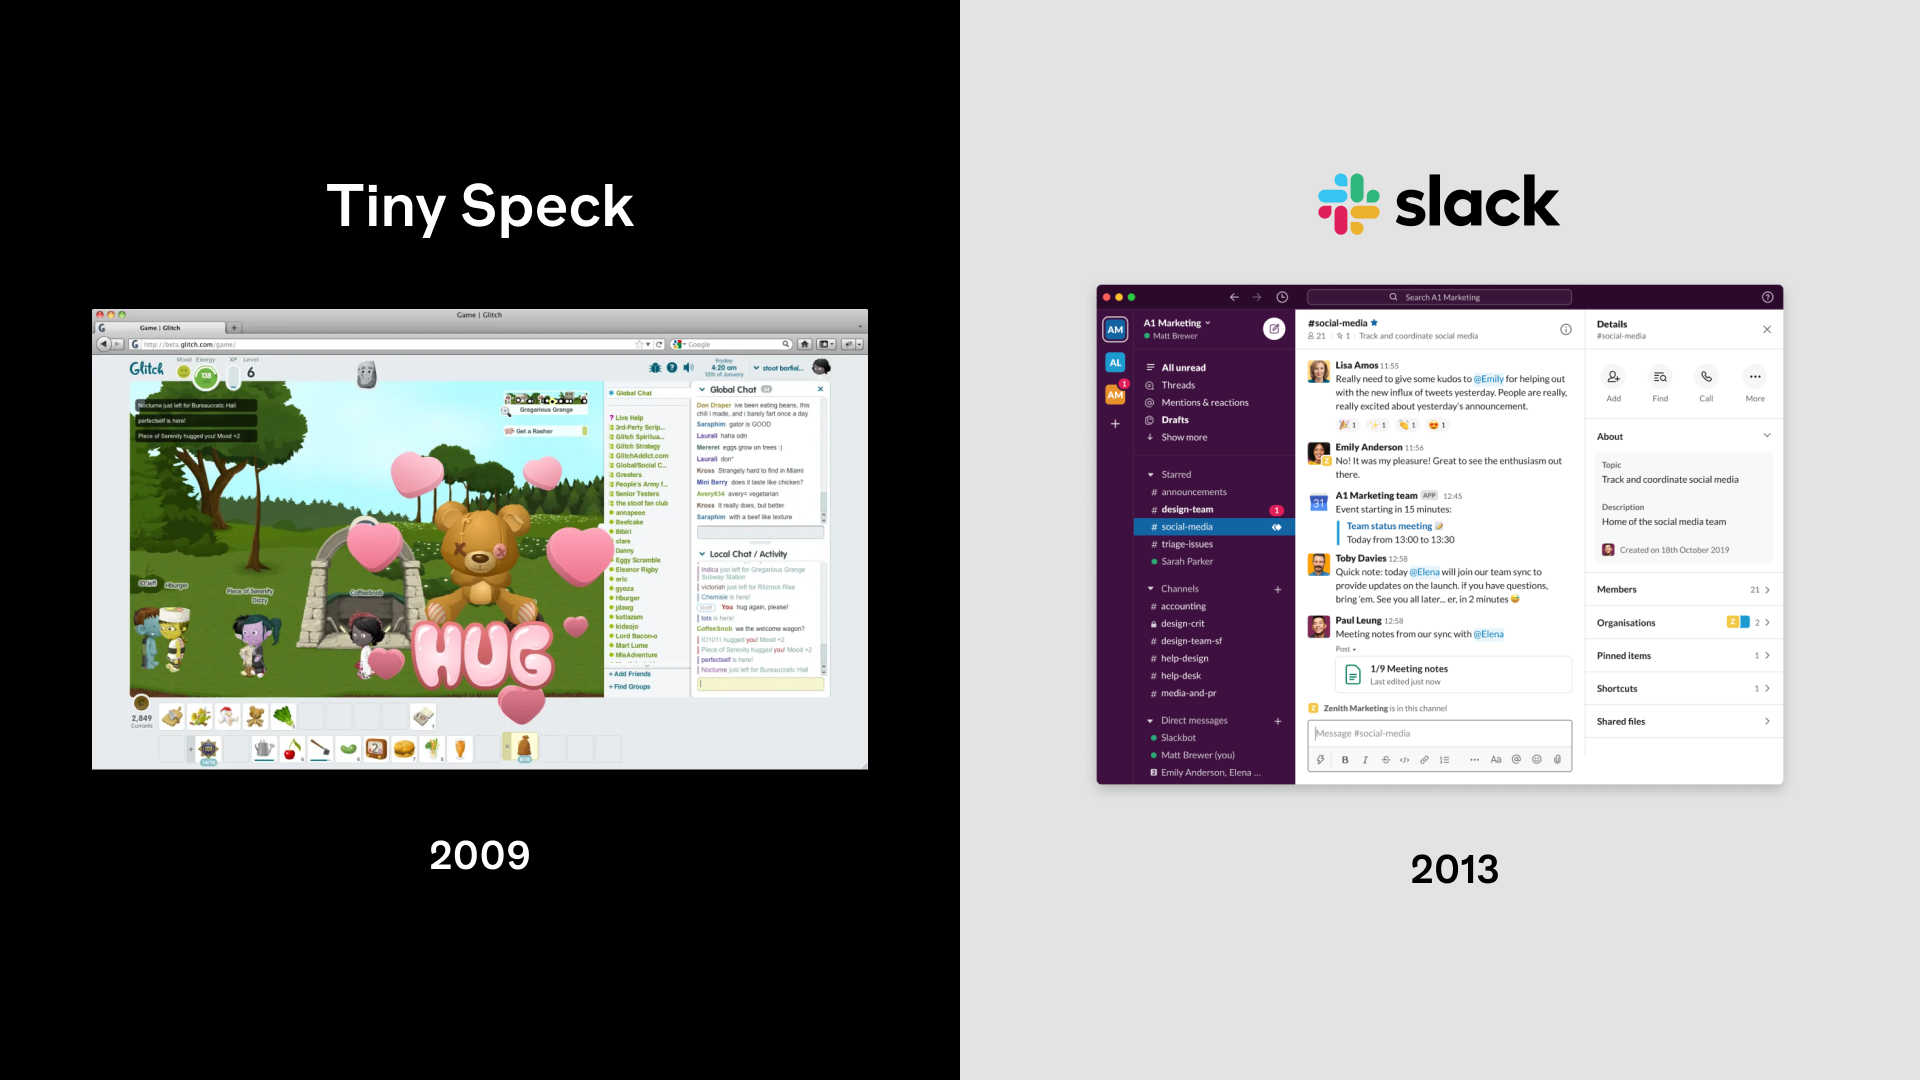 From Tiny Speck Game to Slack